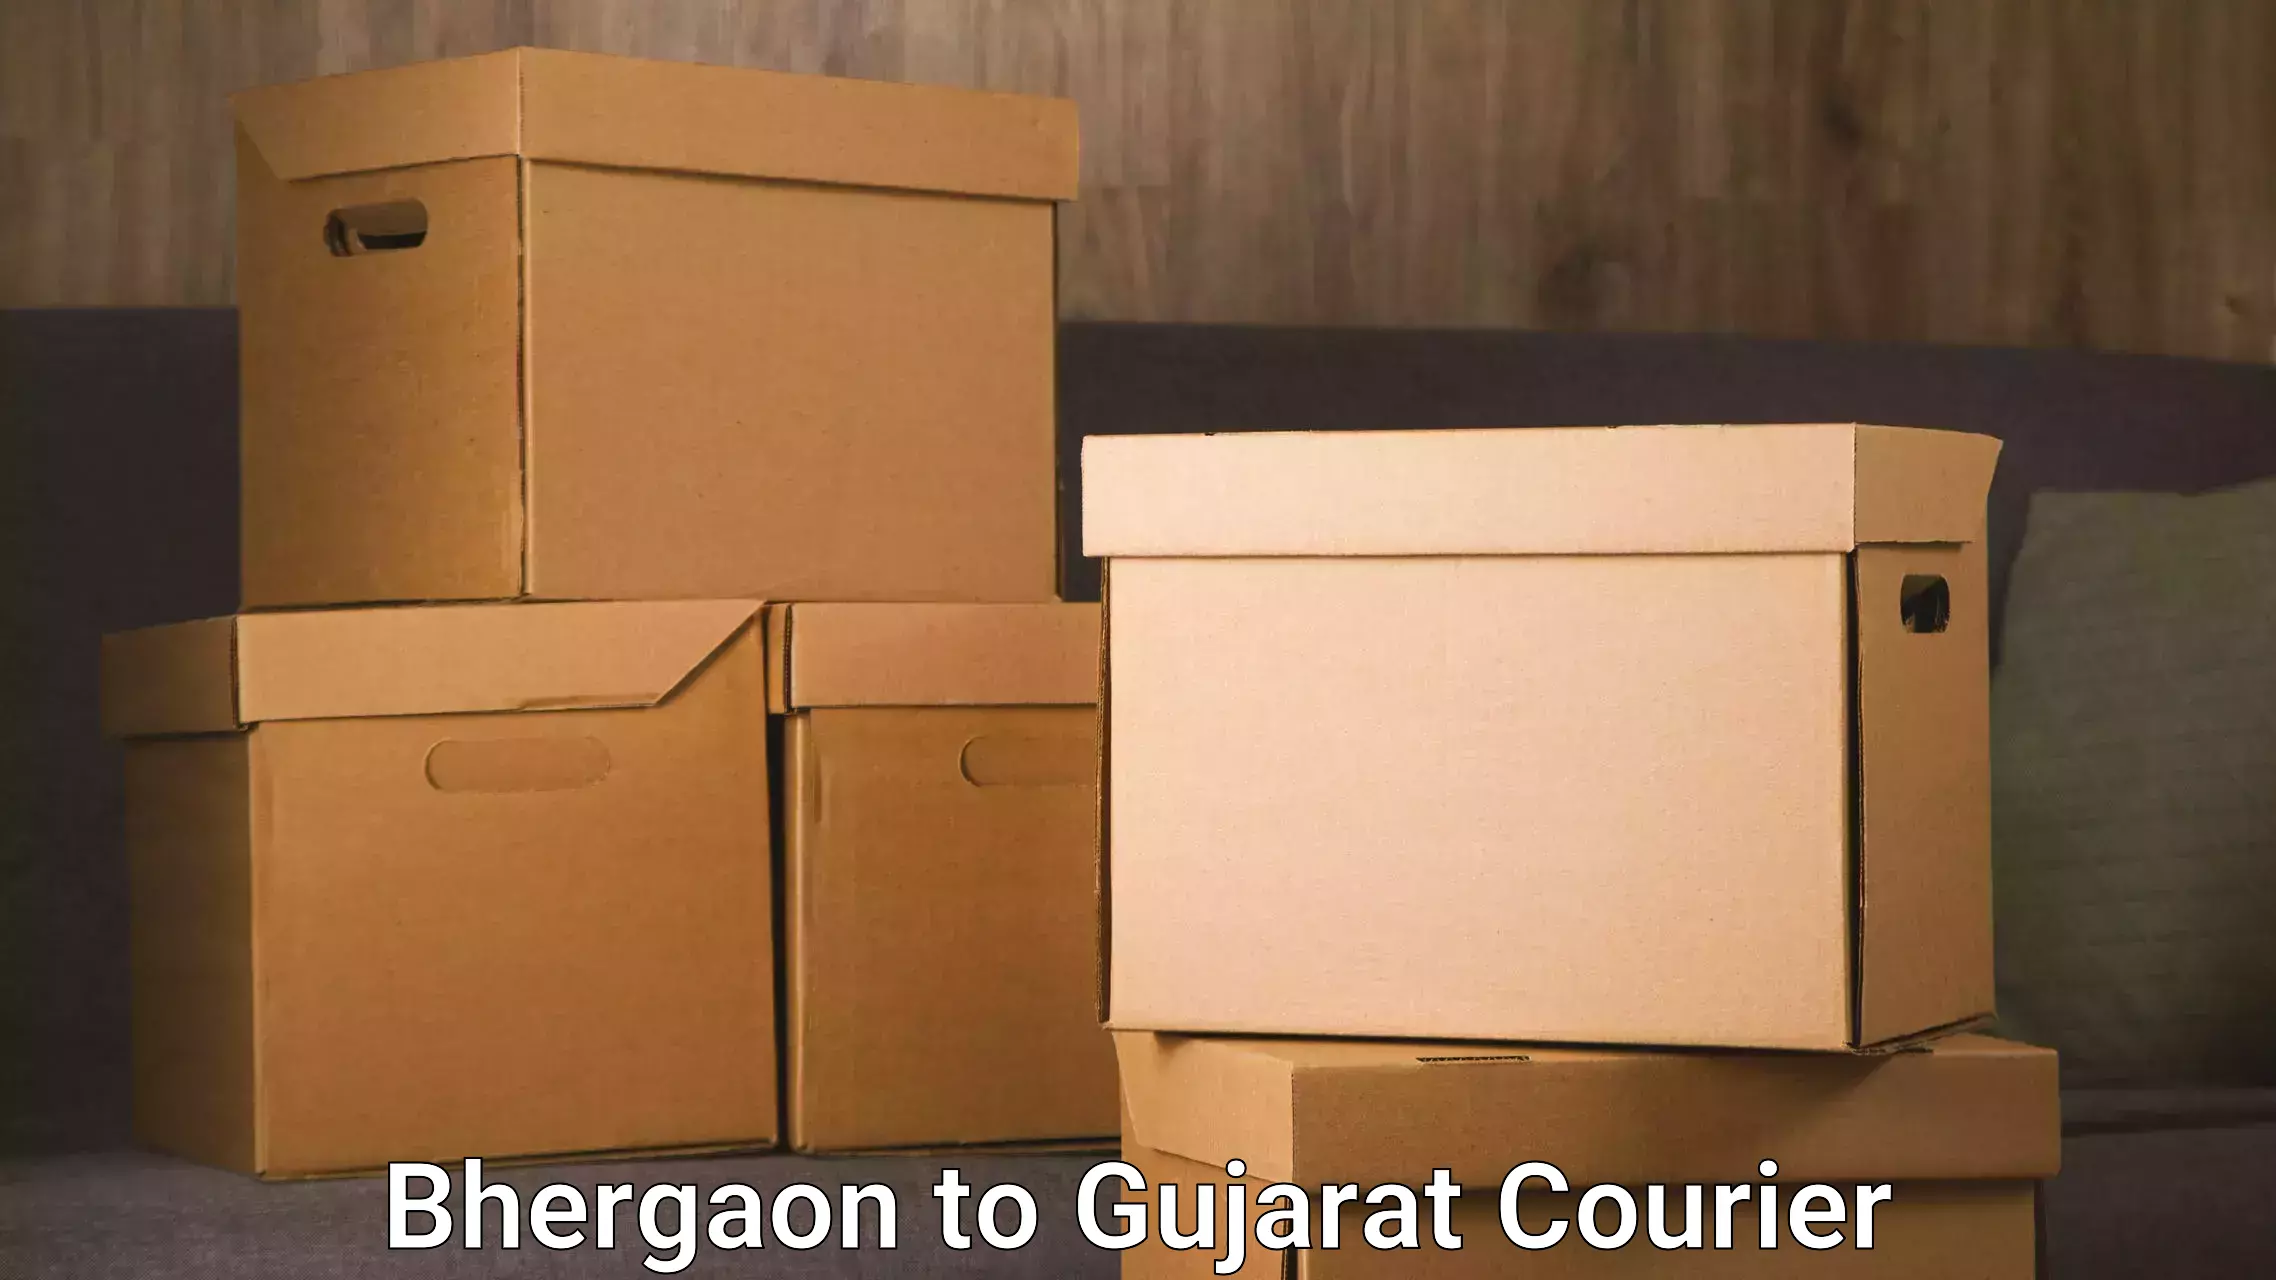 Package delivery network Bhergaon to Morbi